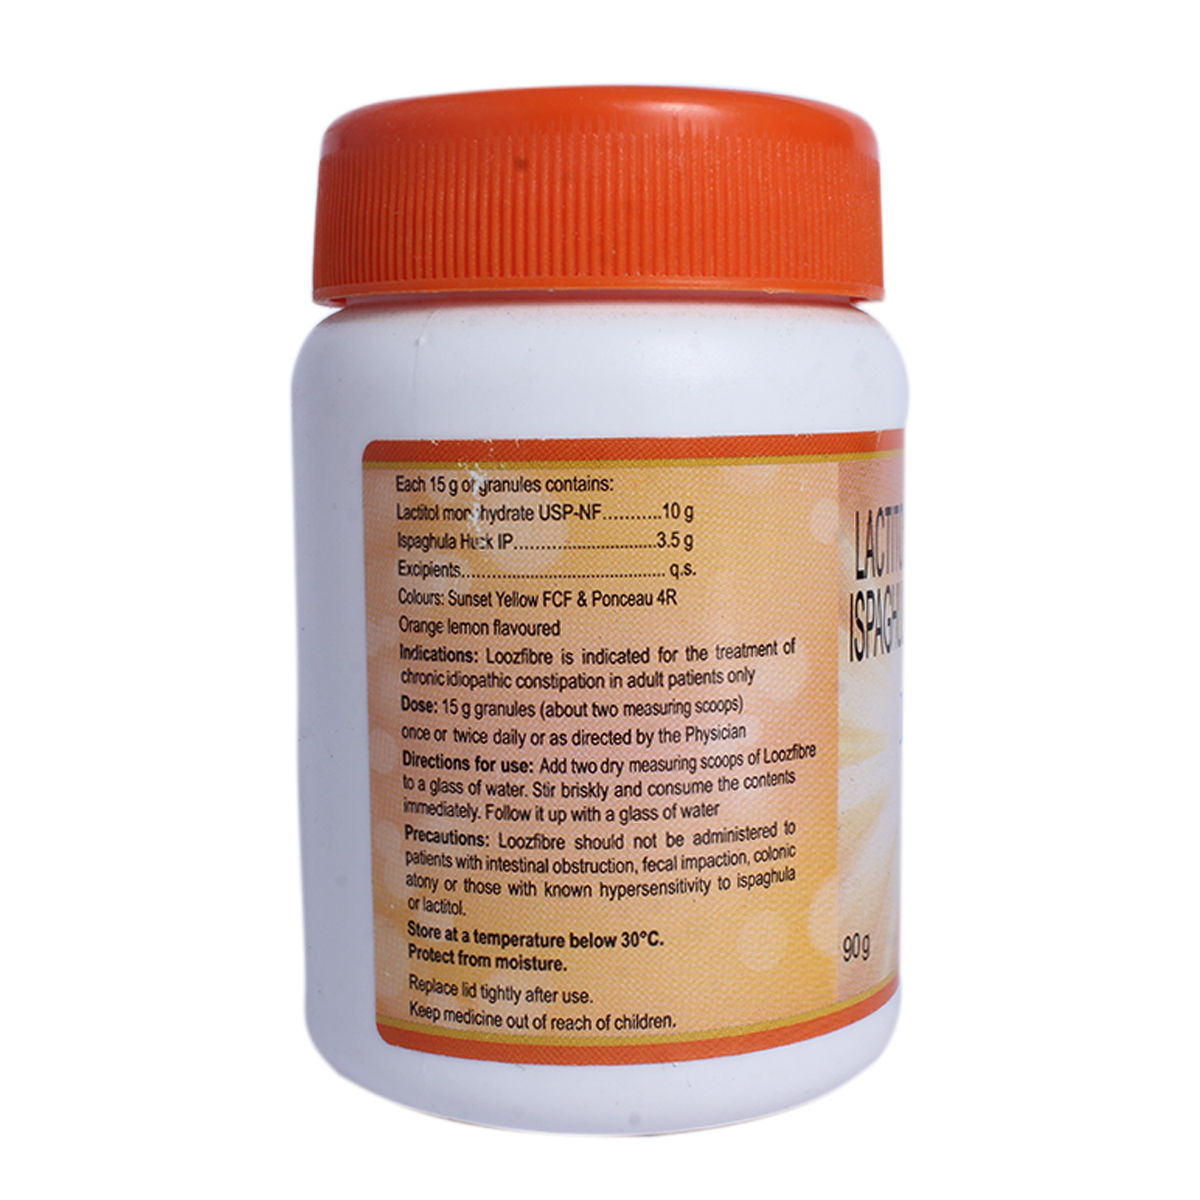 Looz Fibre Granules 90 gm Price, Uses, Side Effects, Composition ...